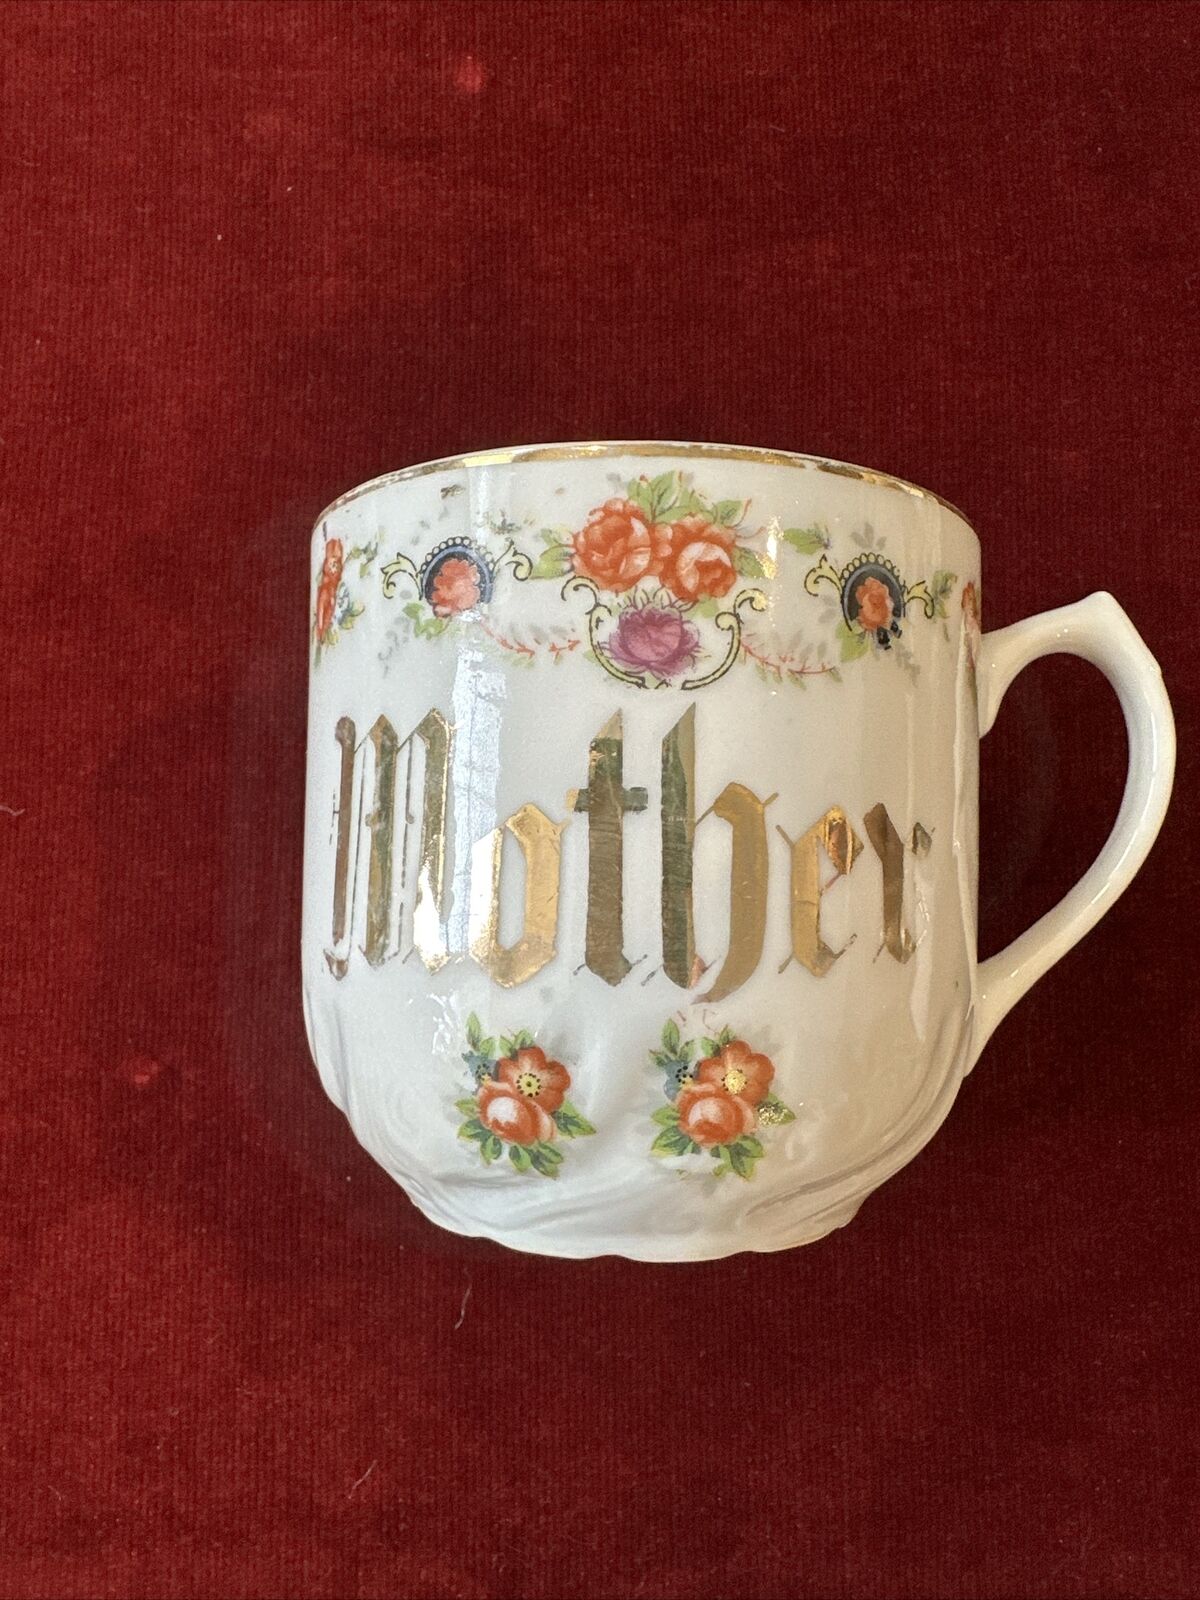 Victorian Vintage Mug - Mother In Gold With Floral Roses Made In Occupied Japan